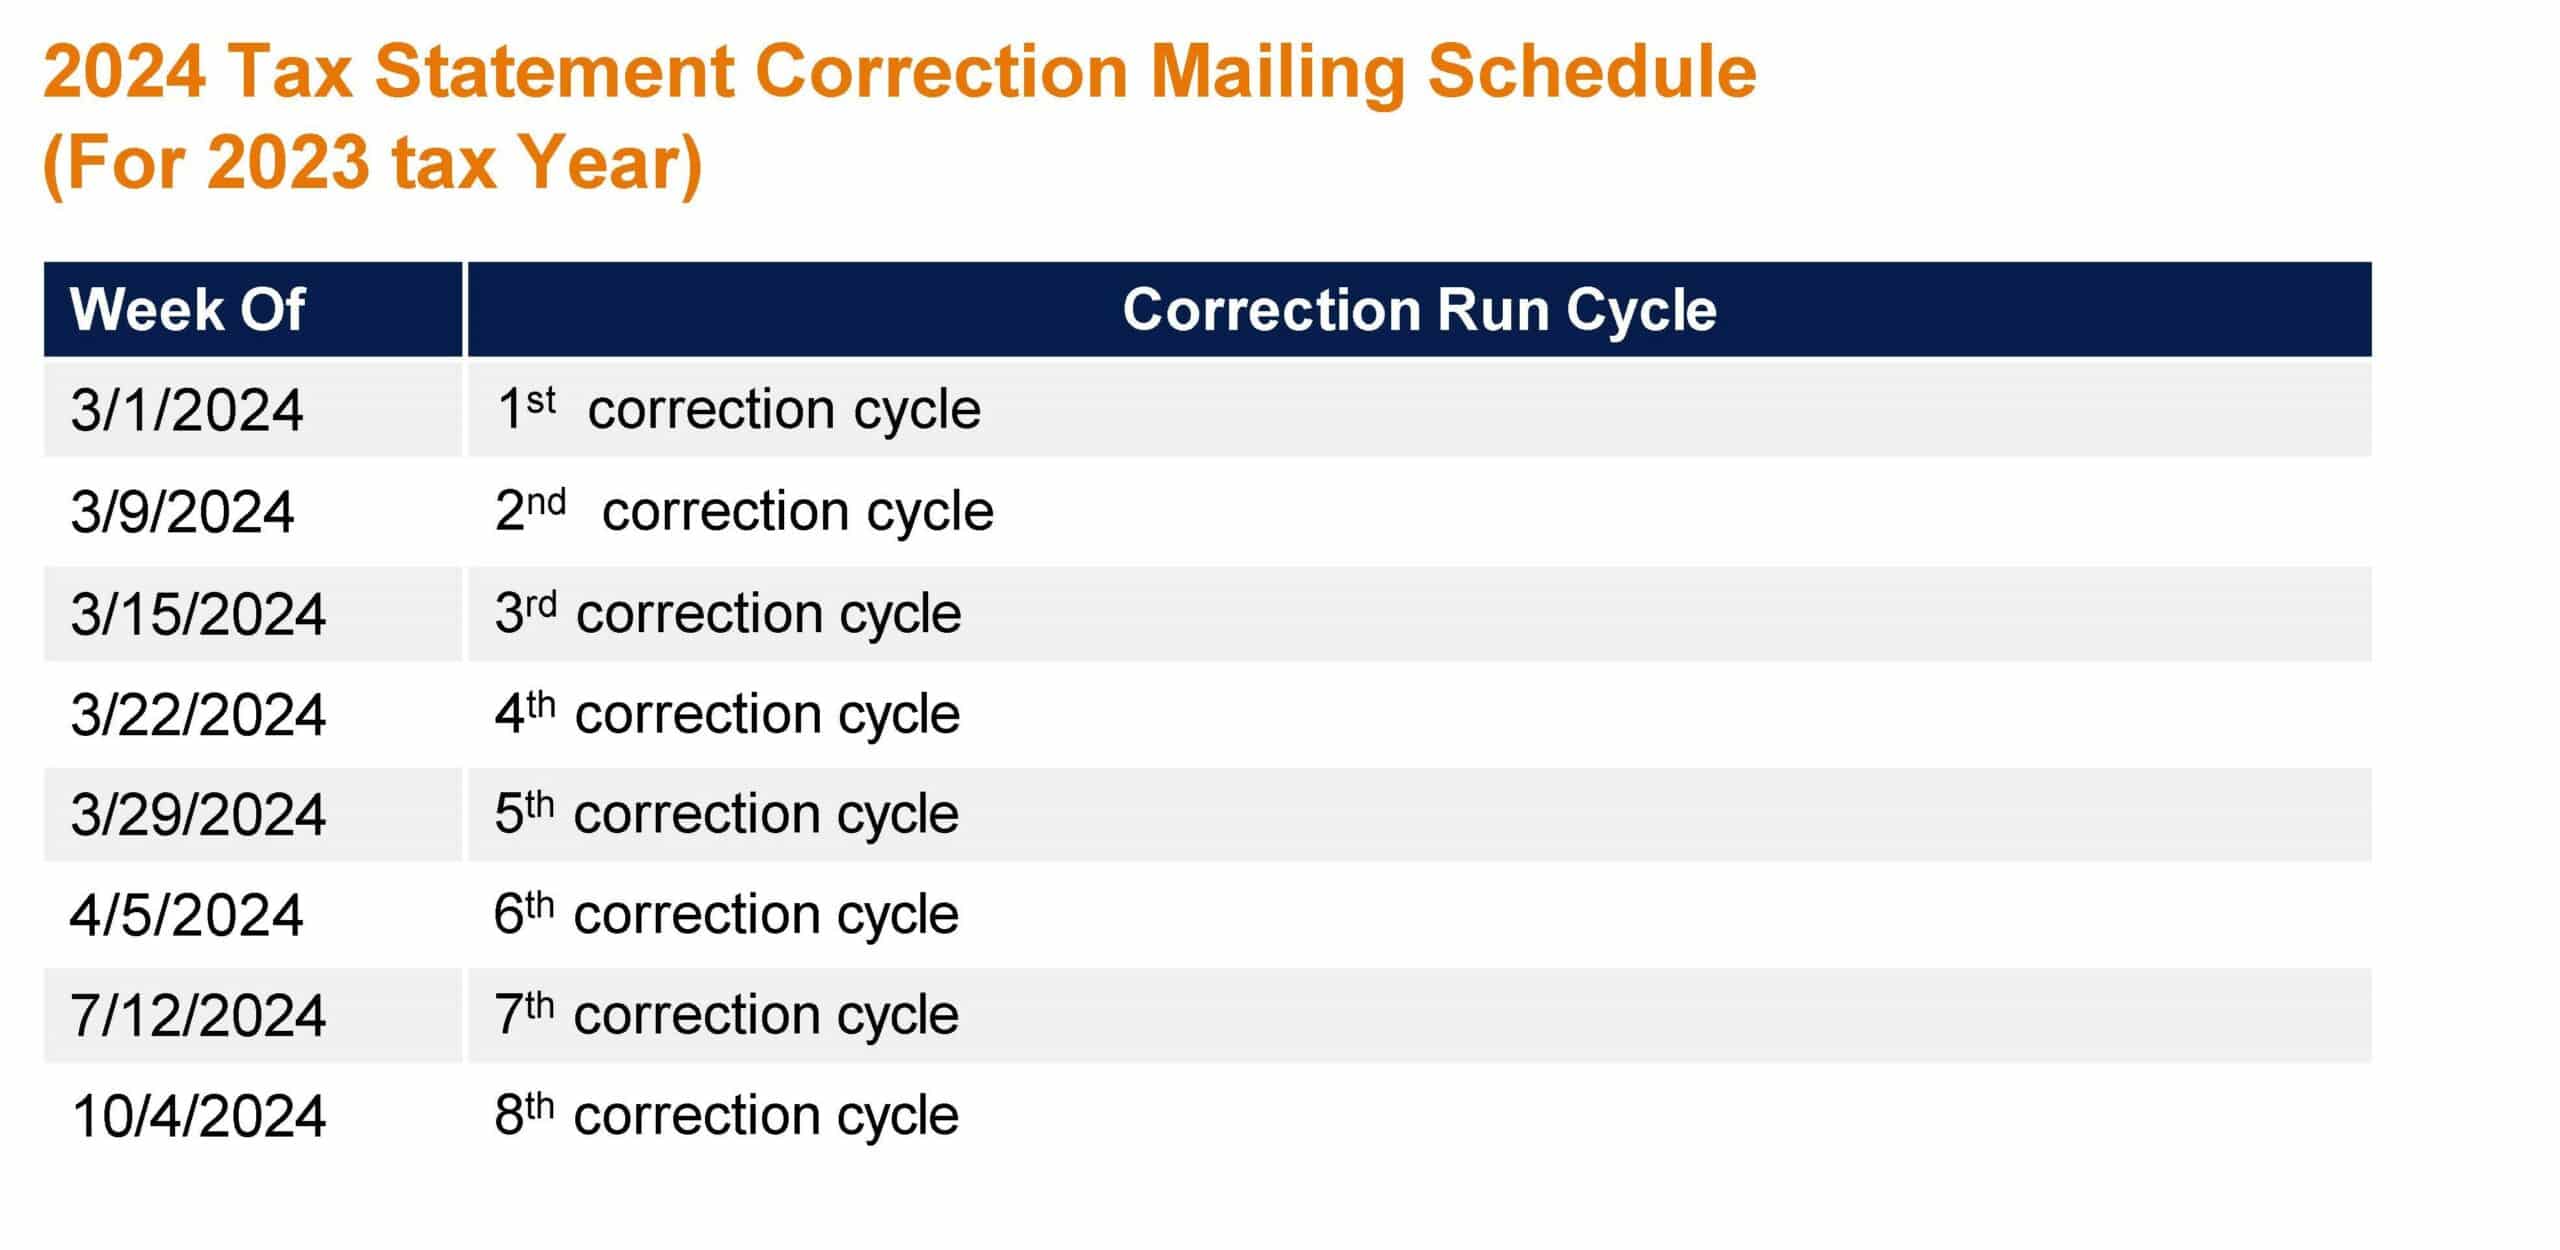 2024 Tax Statement Correction Mailing Schedule (For 2023 tax Year)